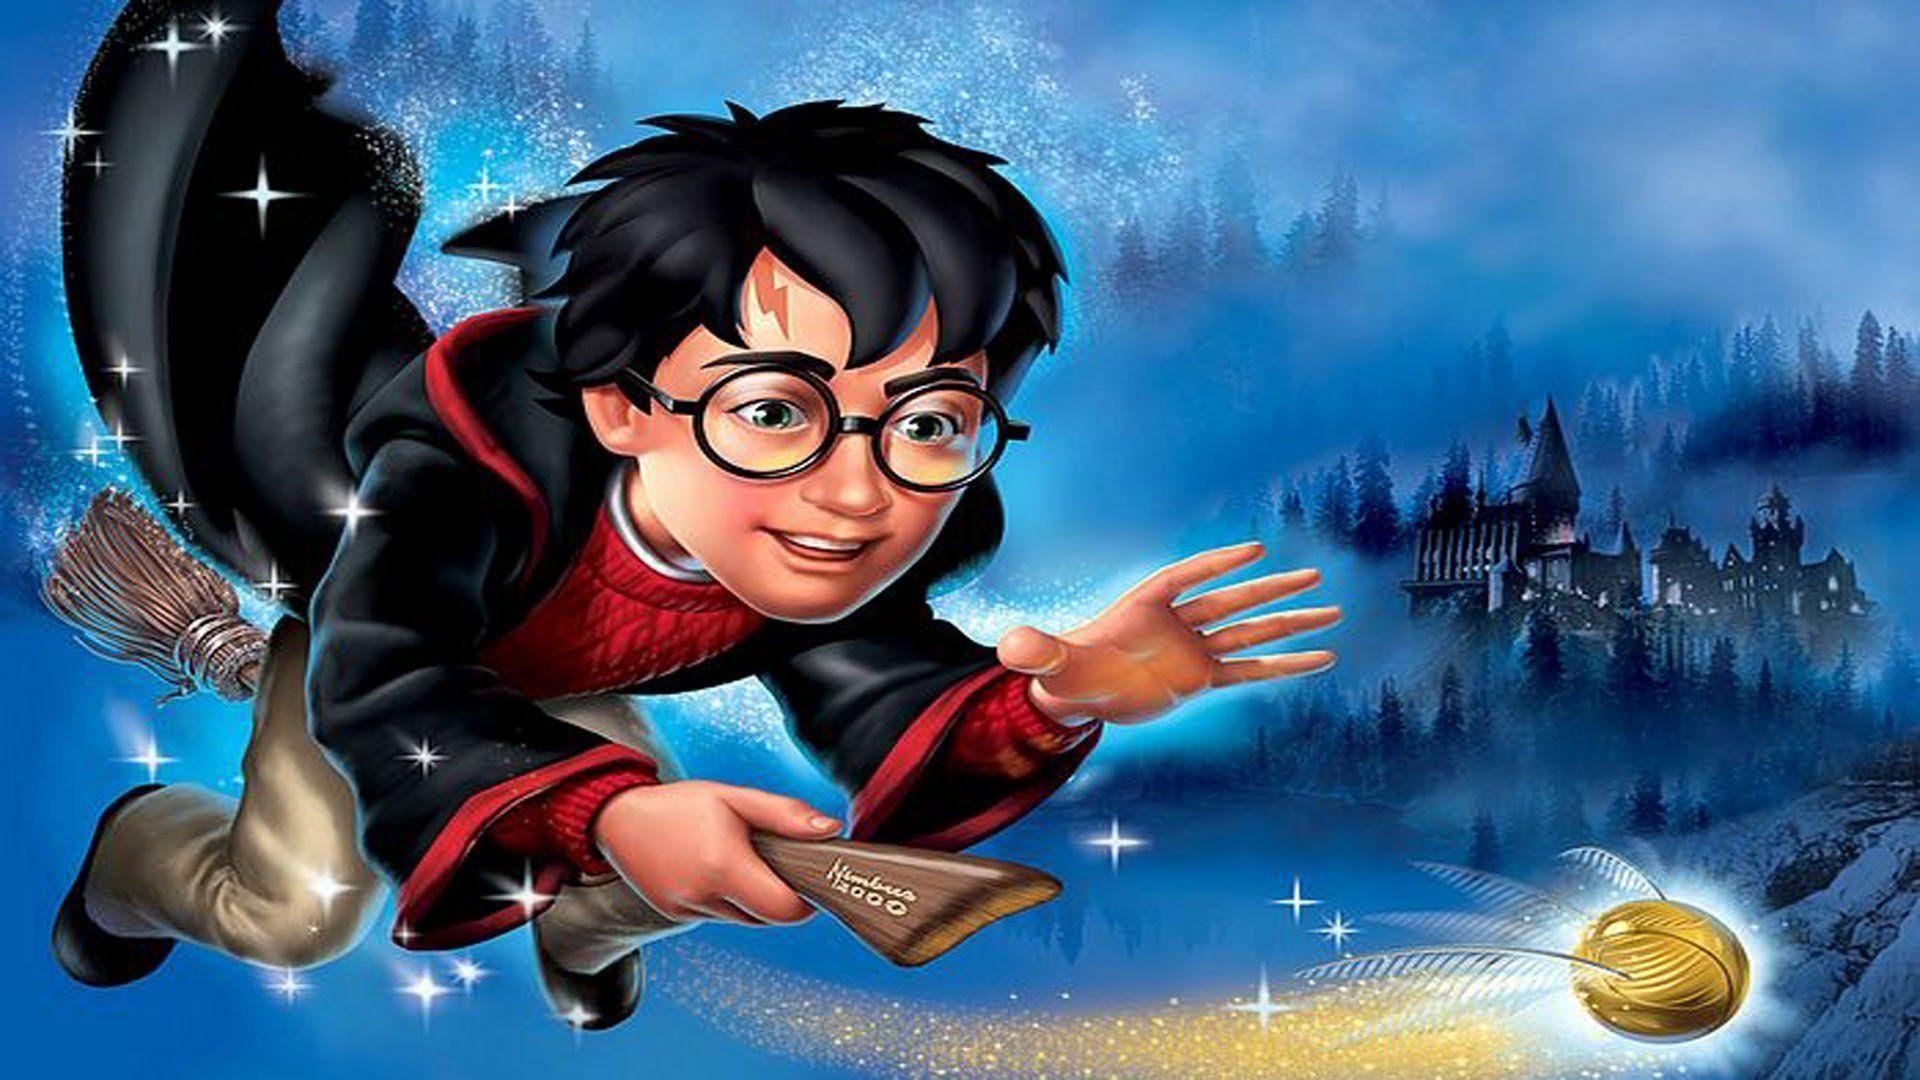 HARRY POTTER fantasy adventure witch series wizard magic wallpaper